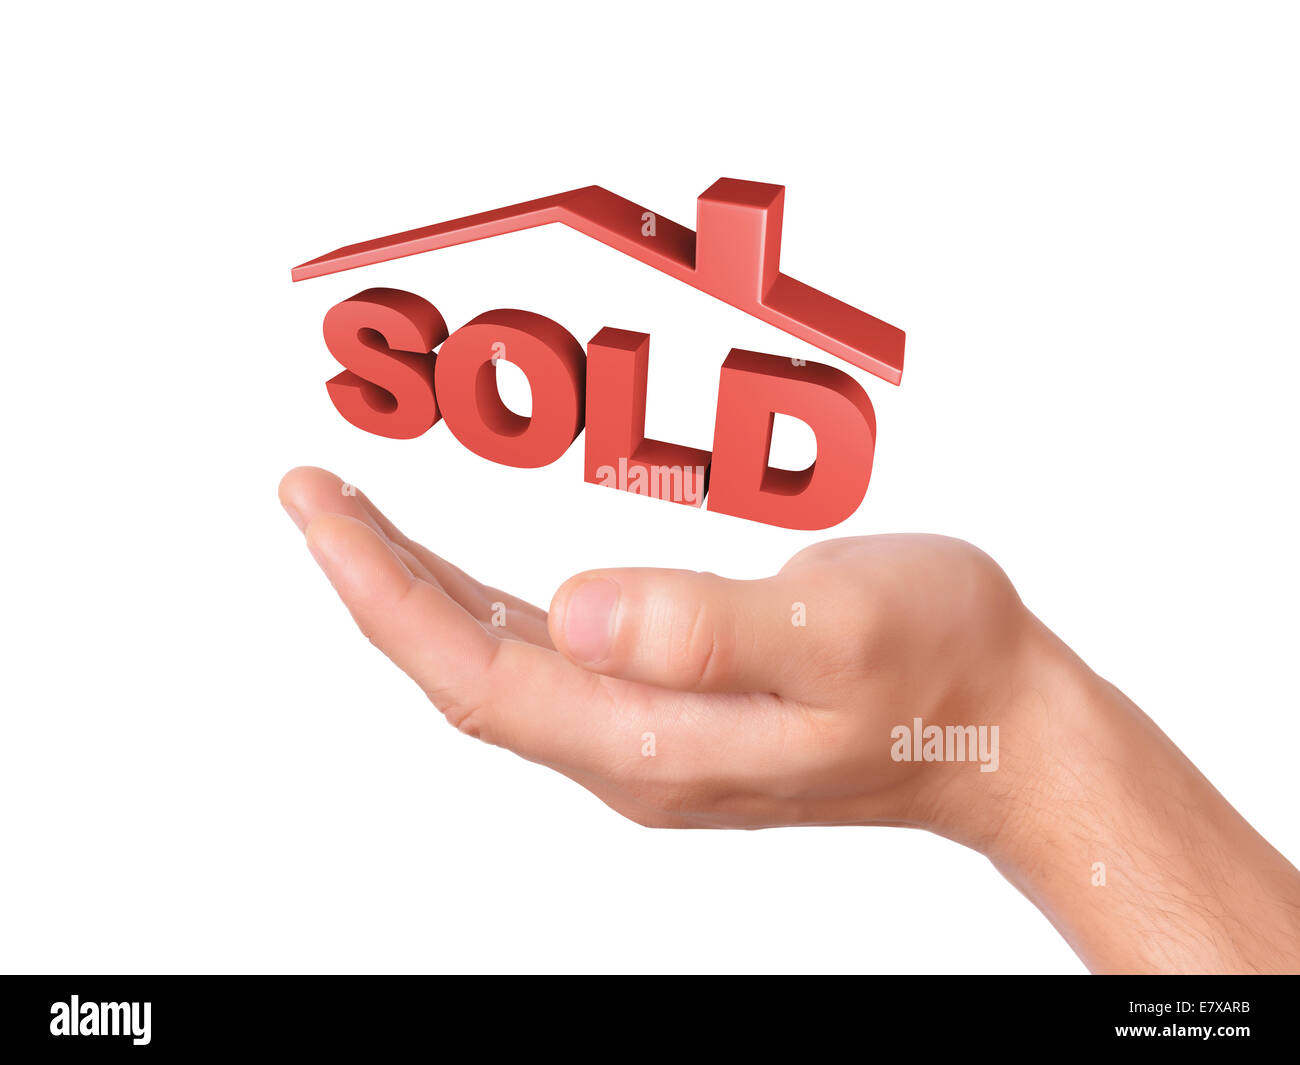 image of hand holding red sold house. sale concept  isolated on white background Stock Photo